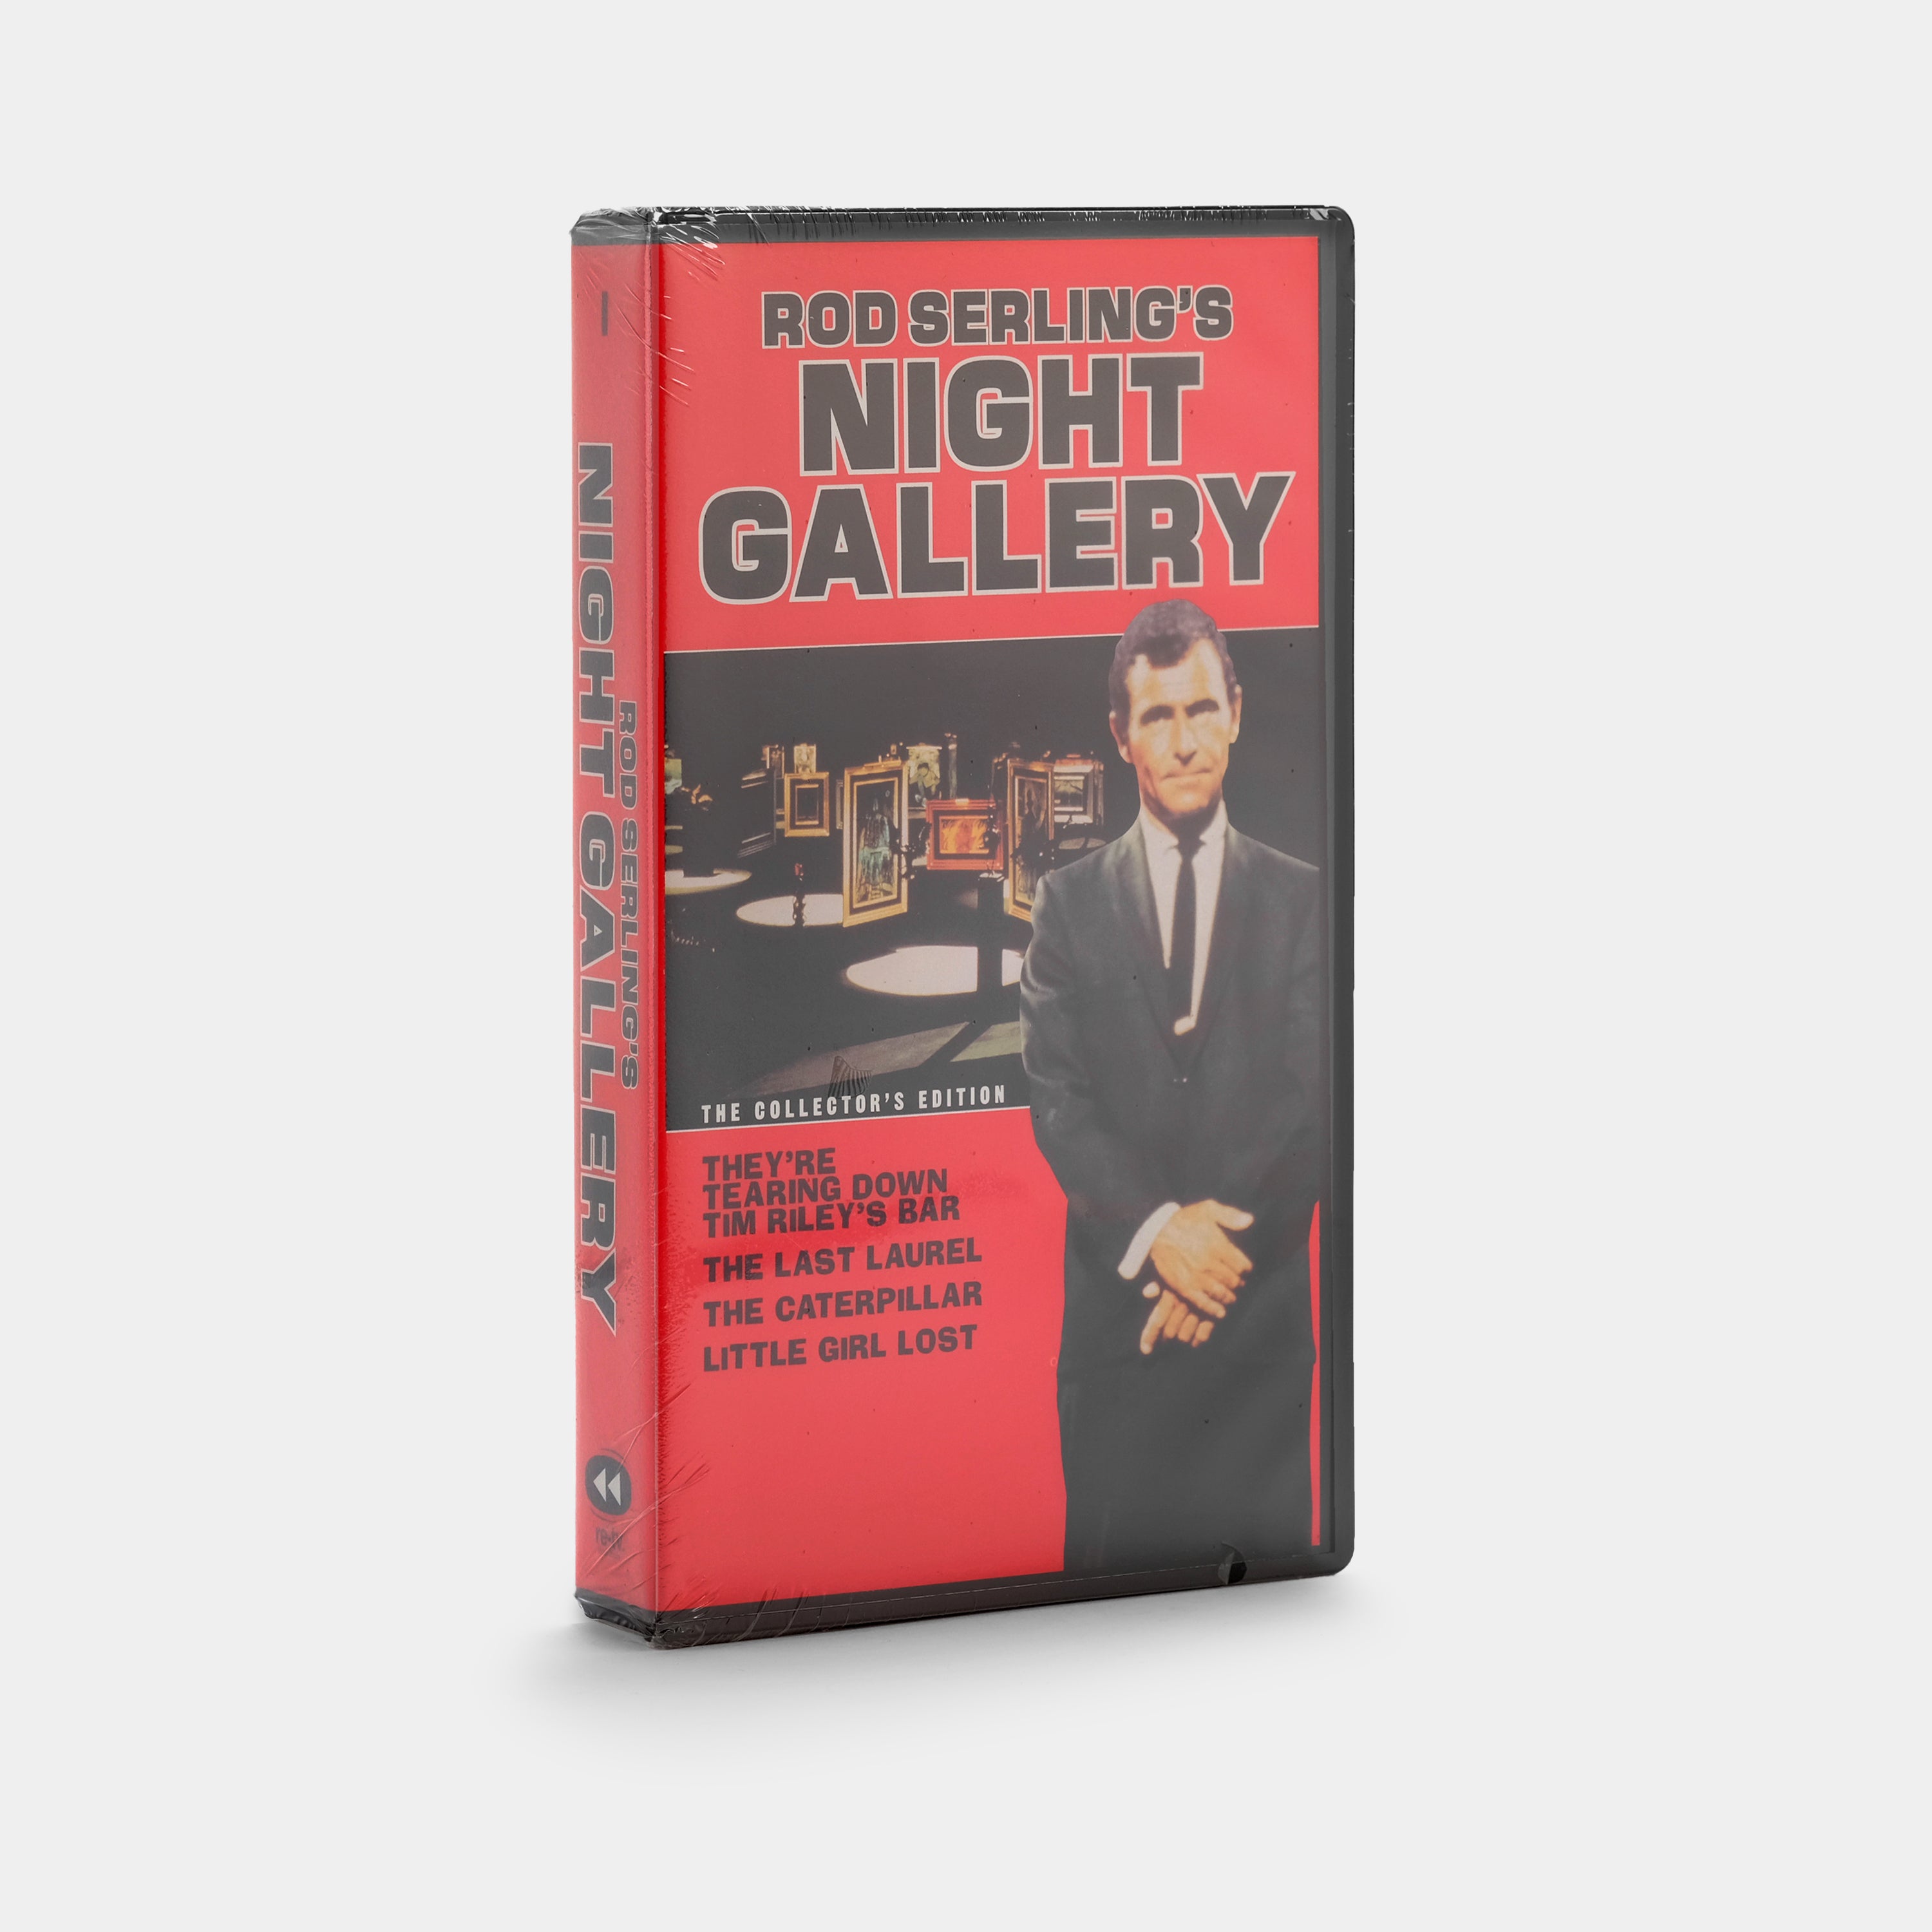 Rod Serling's Night Gallery (Sealed) VHS Tape